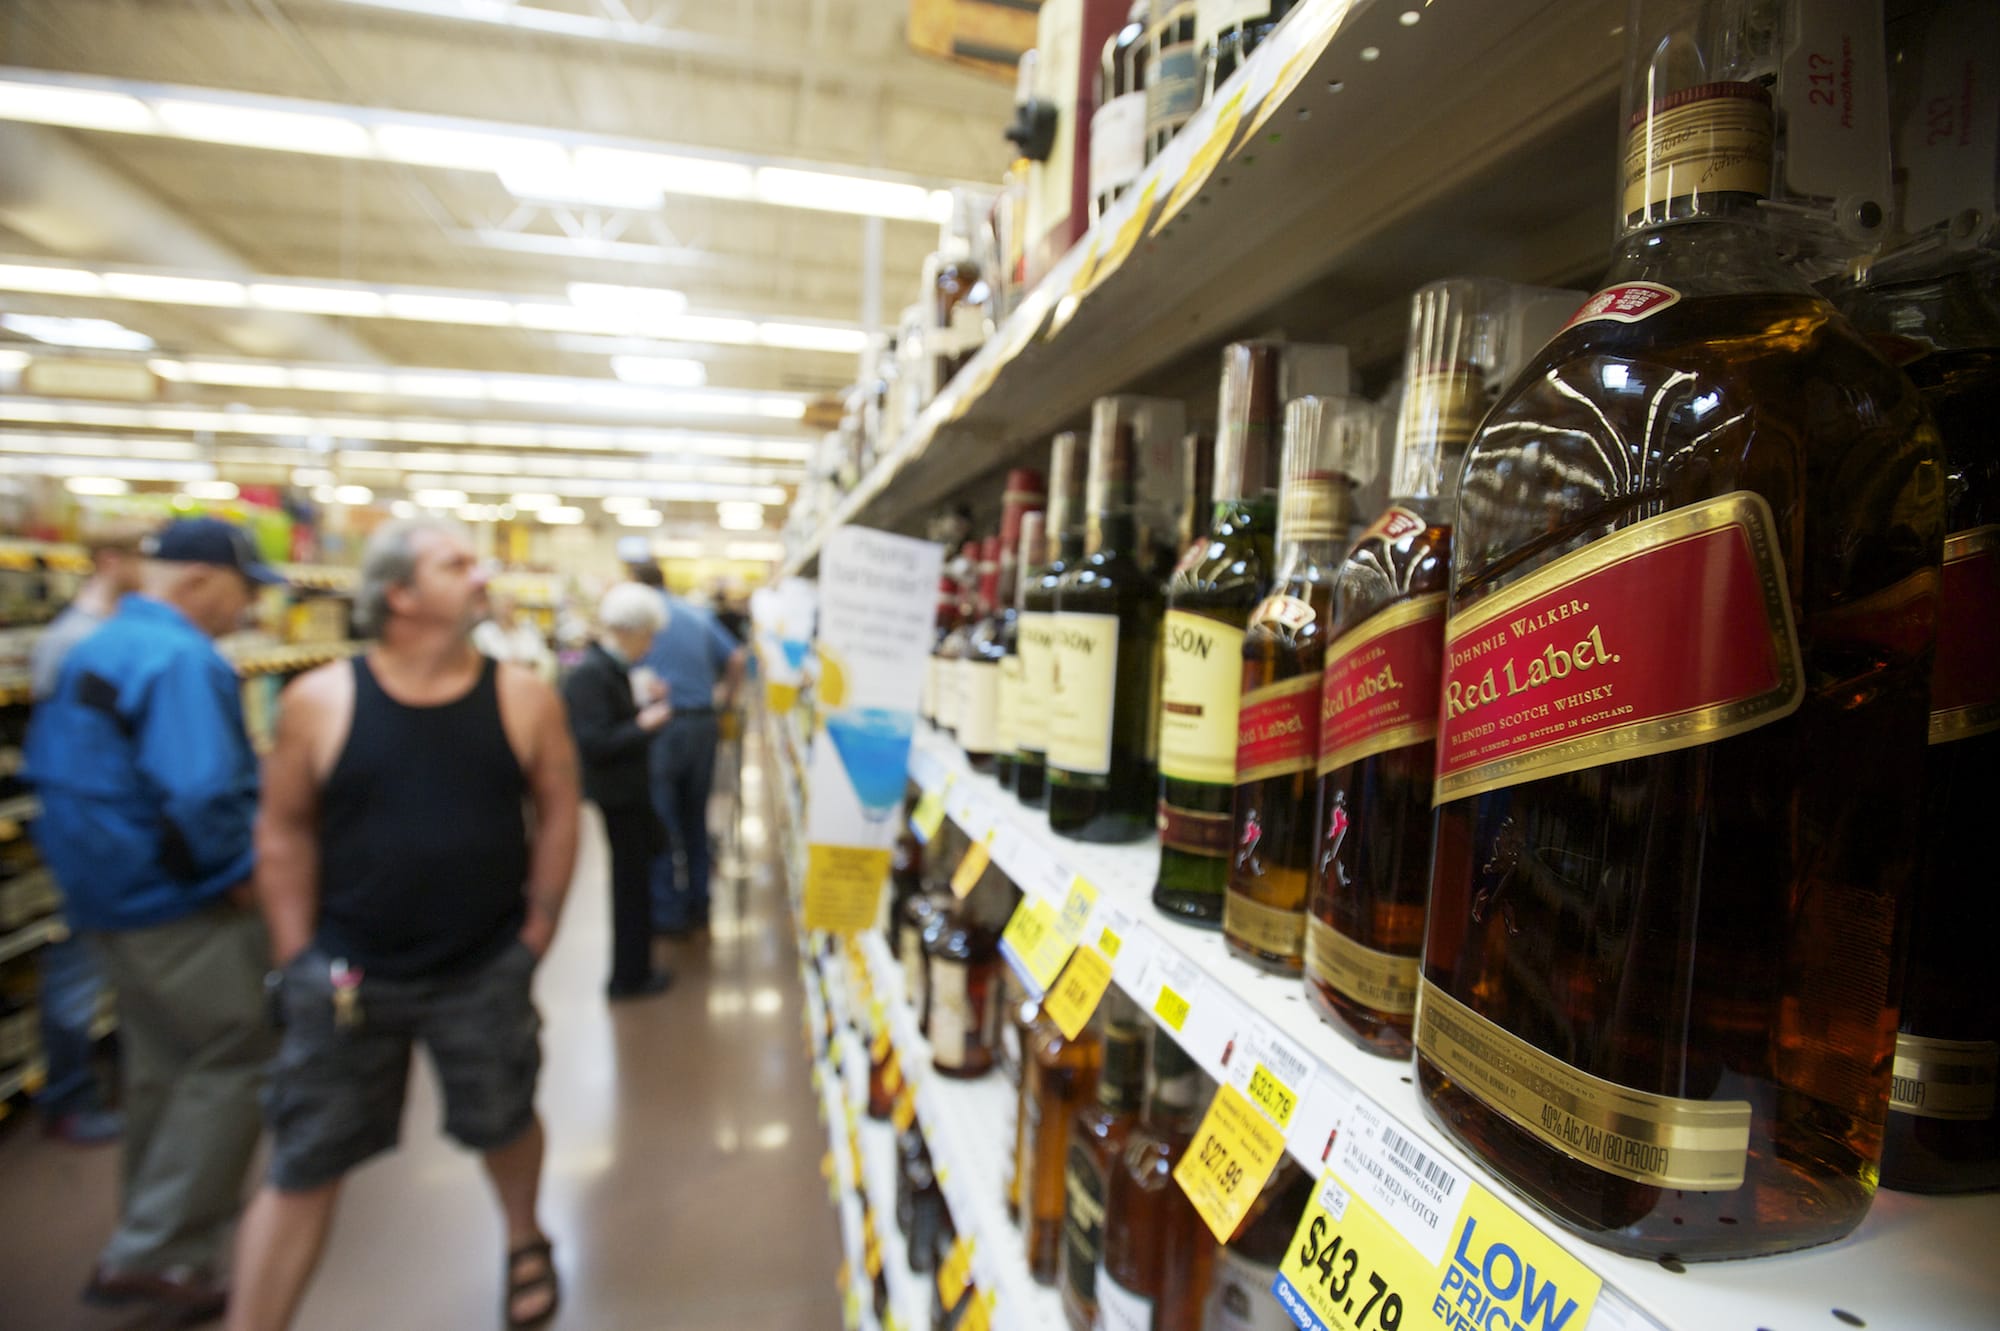 Booze prices at bars and restaurants in Washington may go up this year as multiple interests fight over rules following the voter-approved privatization of the state's liquor system.